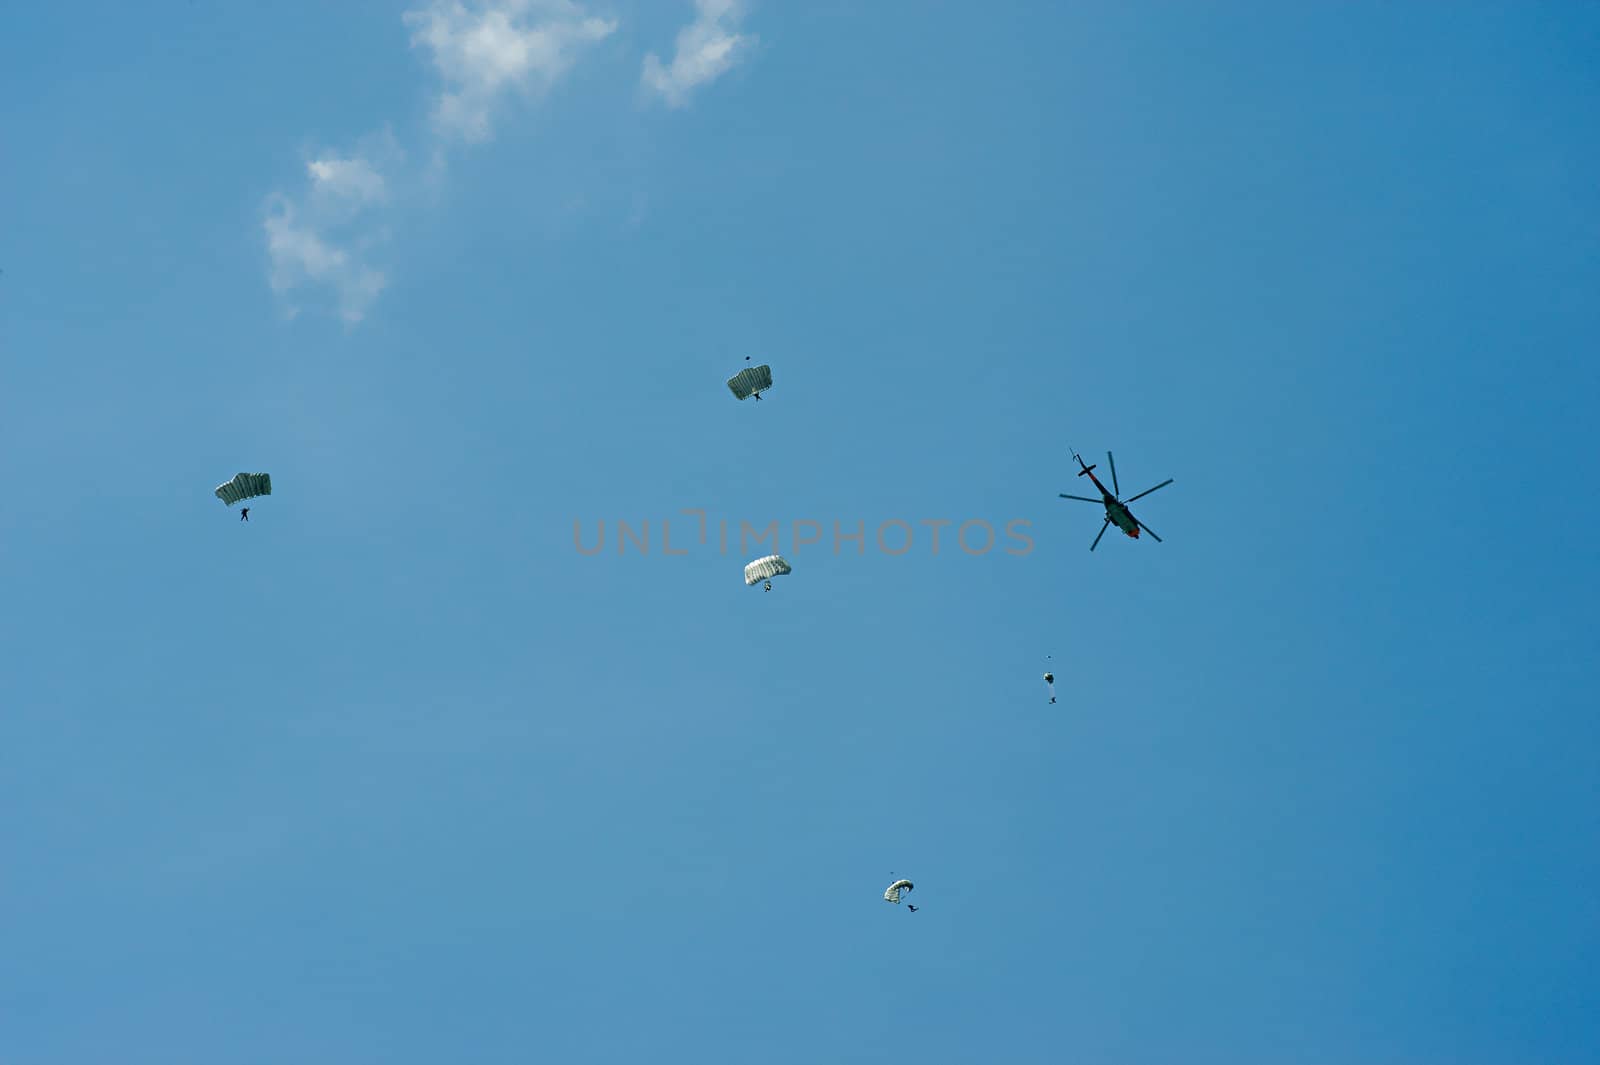 Tandem paragliders and helicopter in the sky
